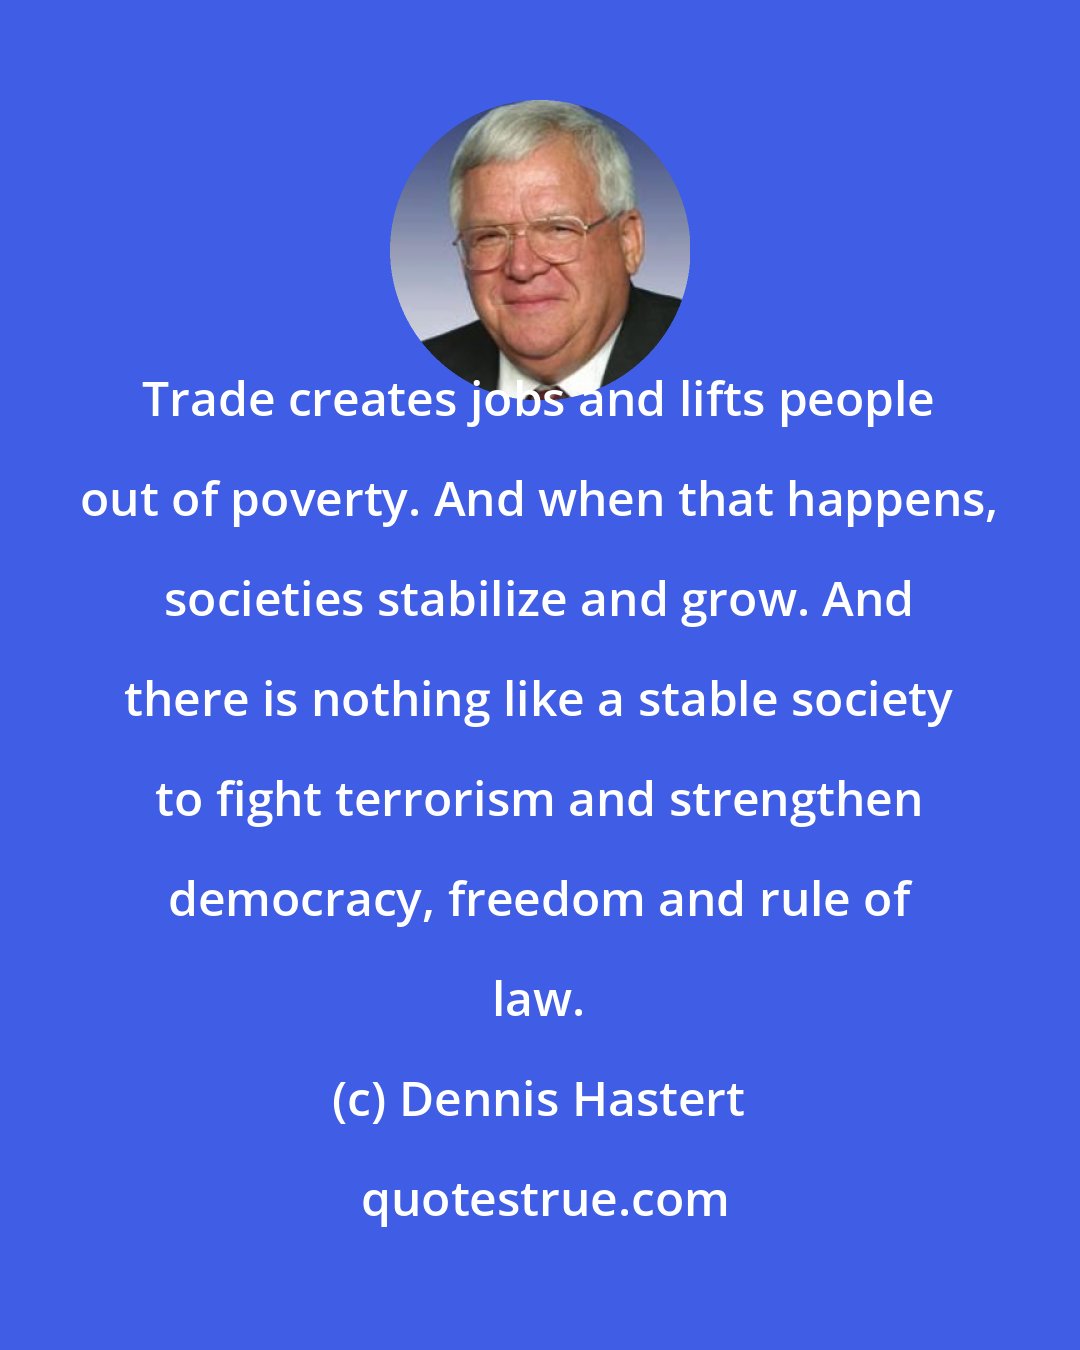 Dennis Hastert: Trade creates jobs and lifts people out of poverty. And when that happens, societies stabilize and grow. And there is nothing like a stable society to fight terrorism and strengthen democracy, freedom and rule of law.